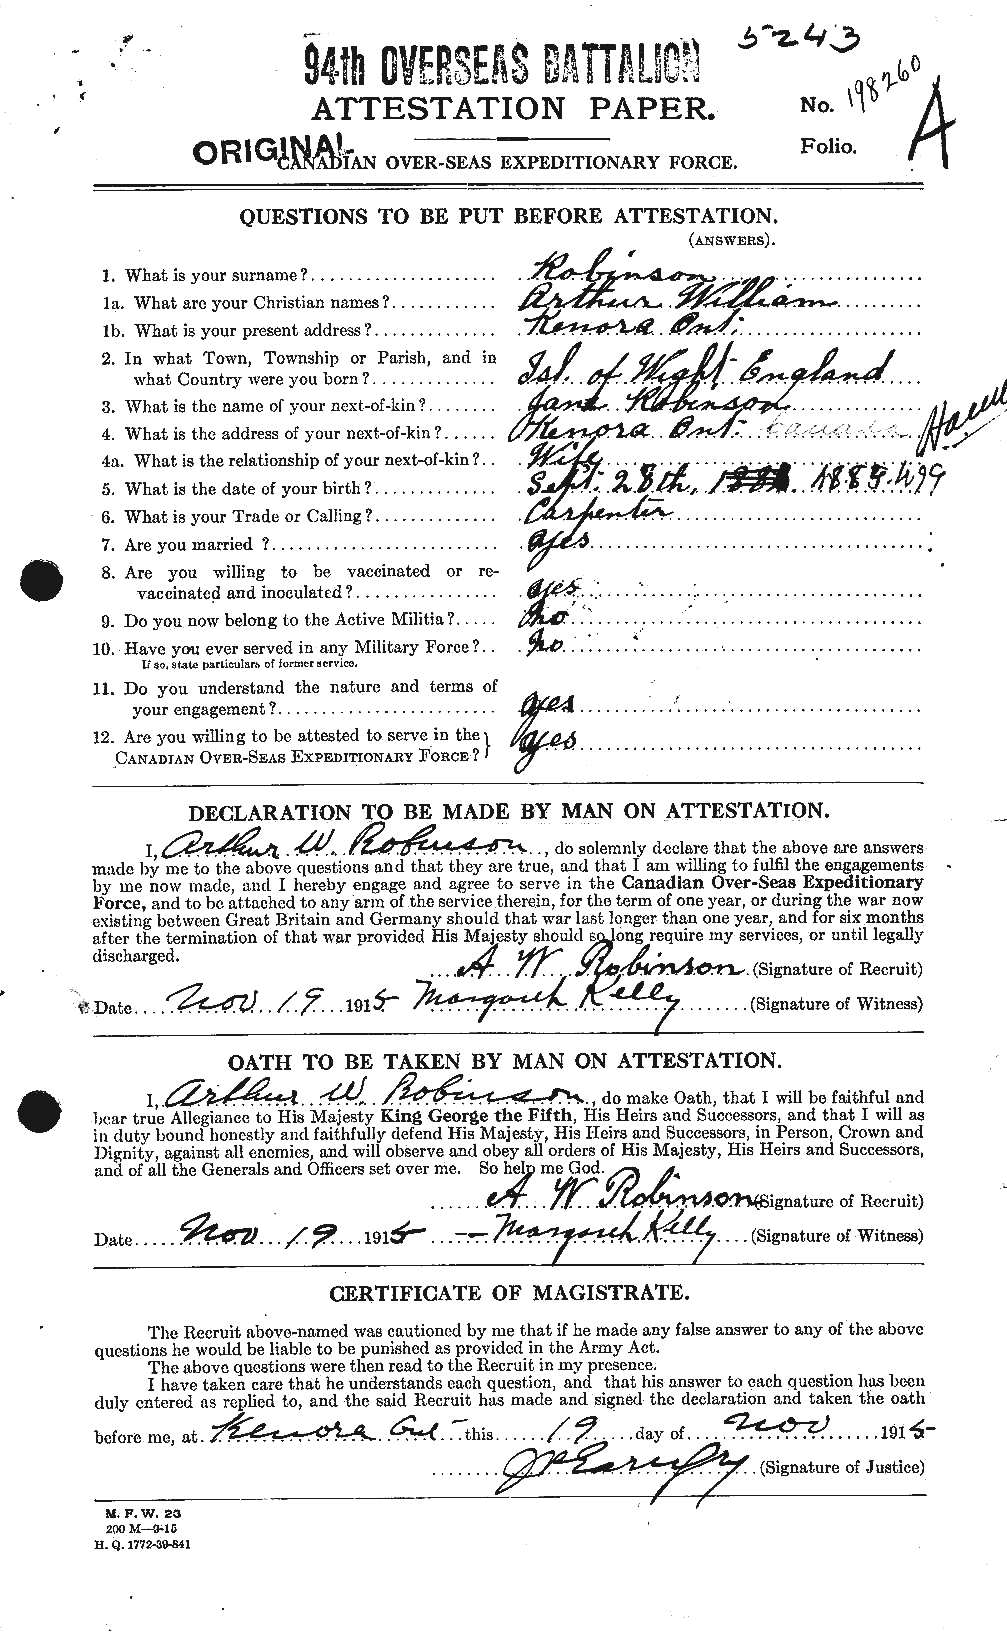 Personnel Records of the First World War - CEF 607010a